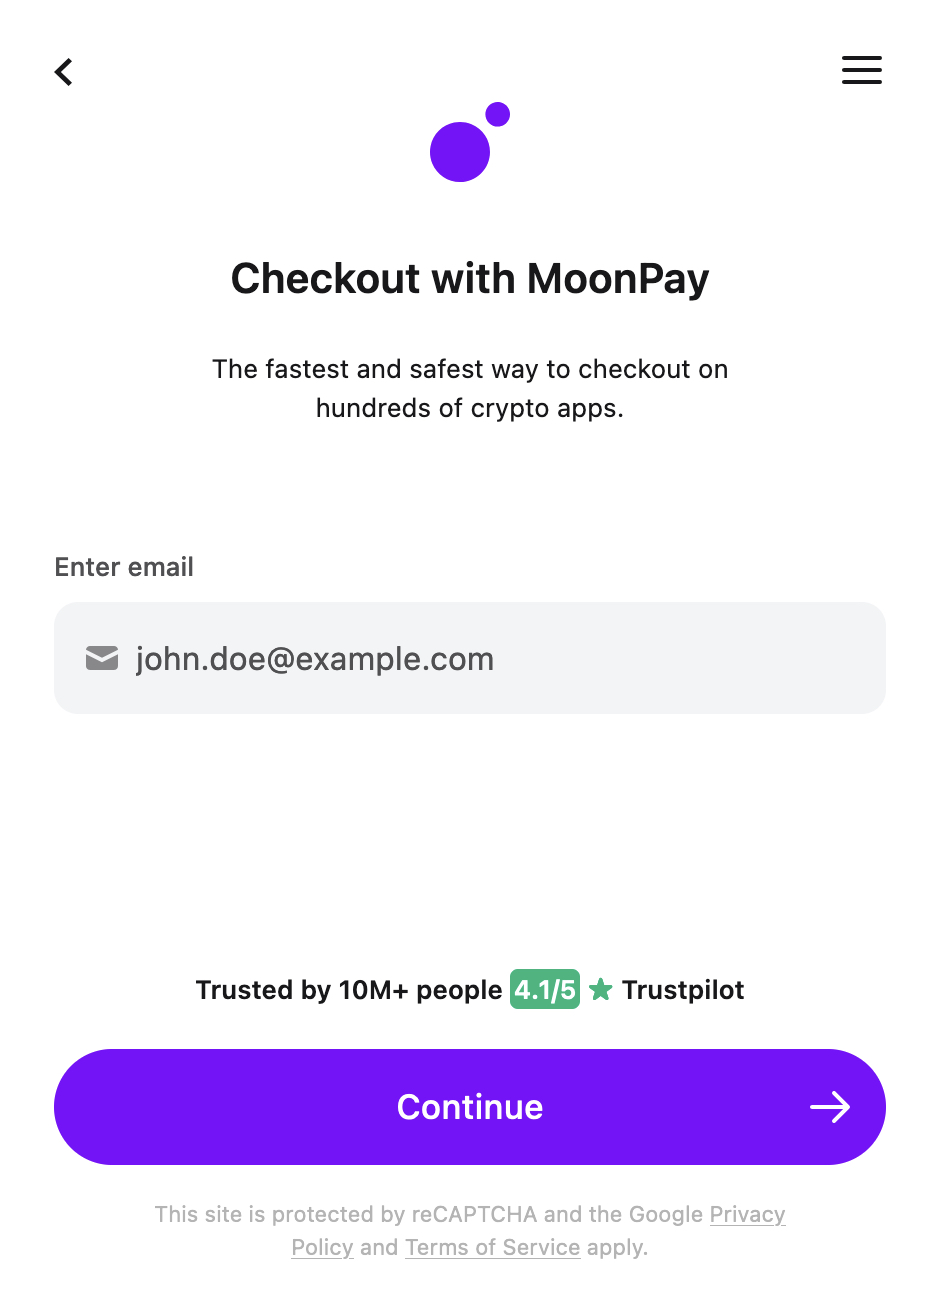 Trust Wallet Checkout with MoonPay screen